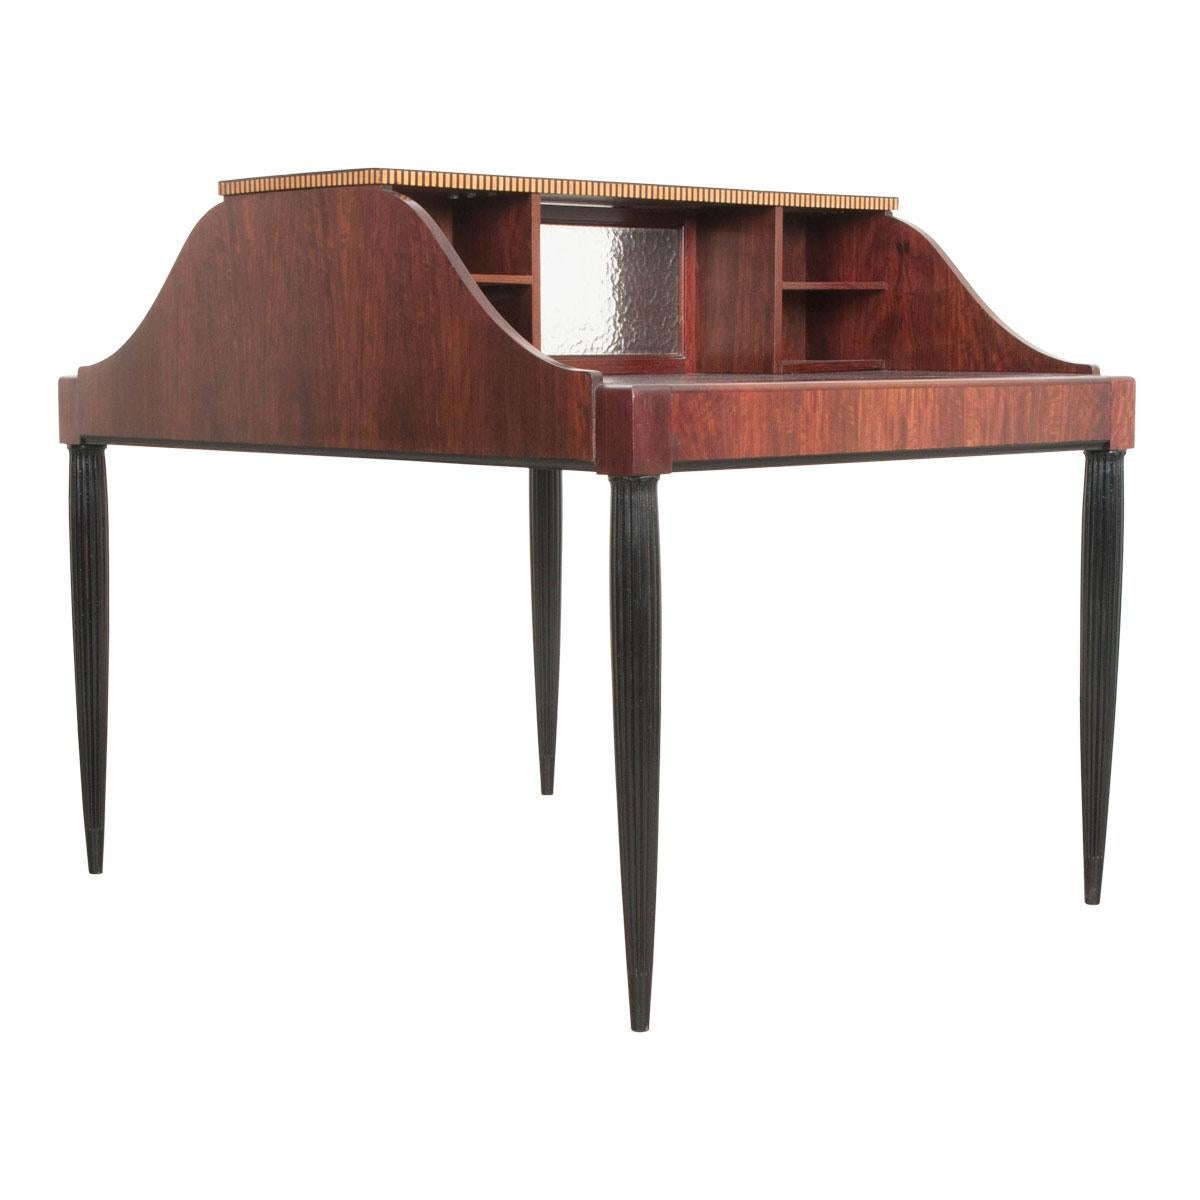 French Early 20th Century Art Deco Partners Desk